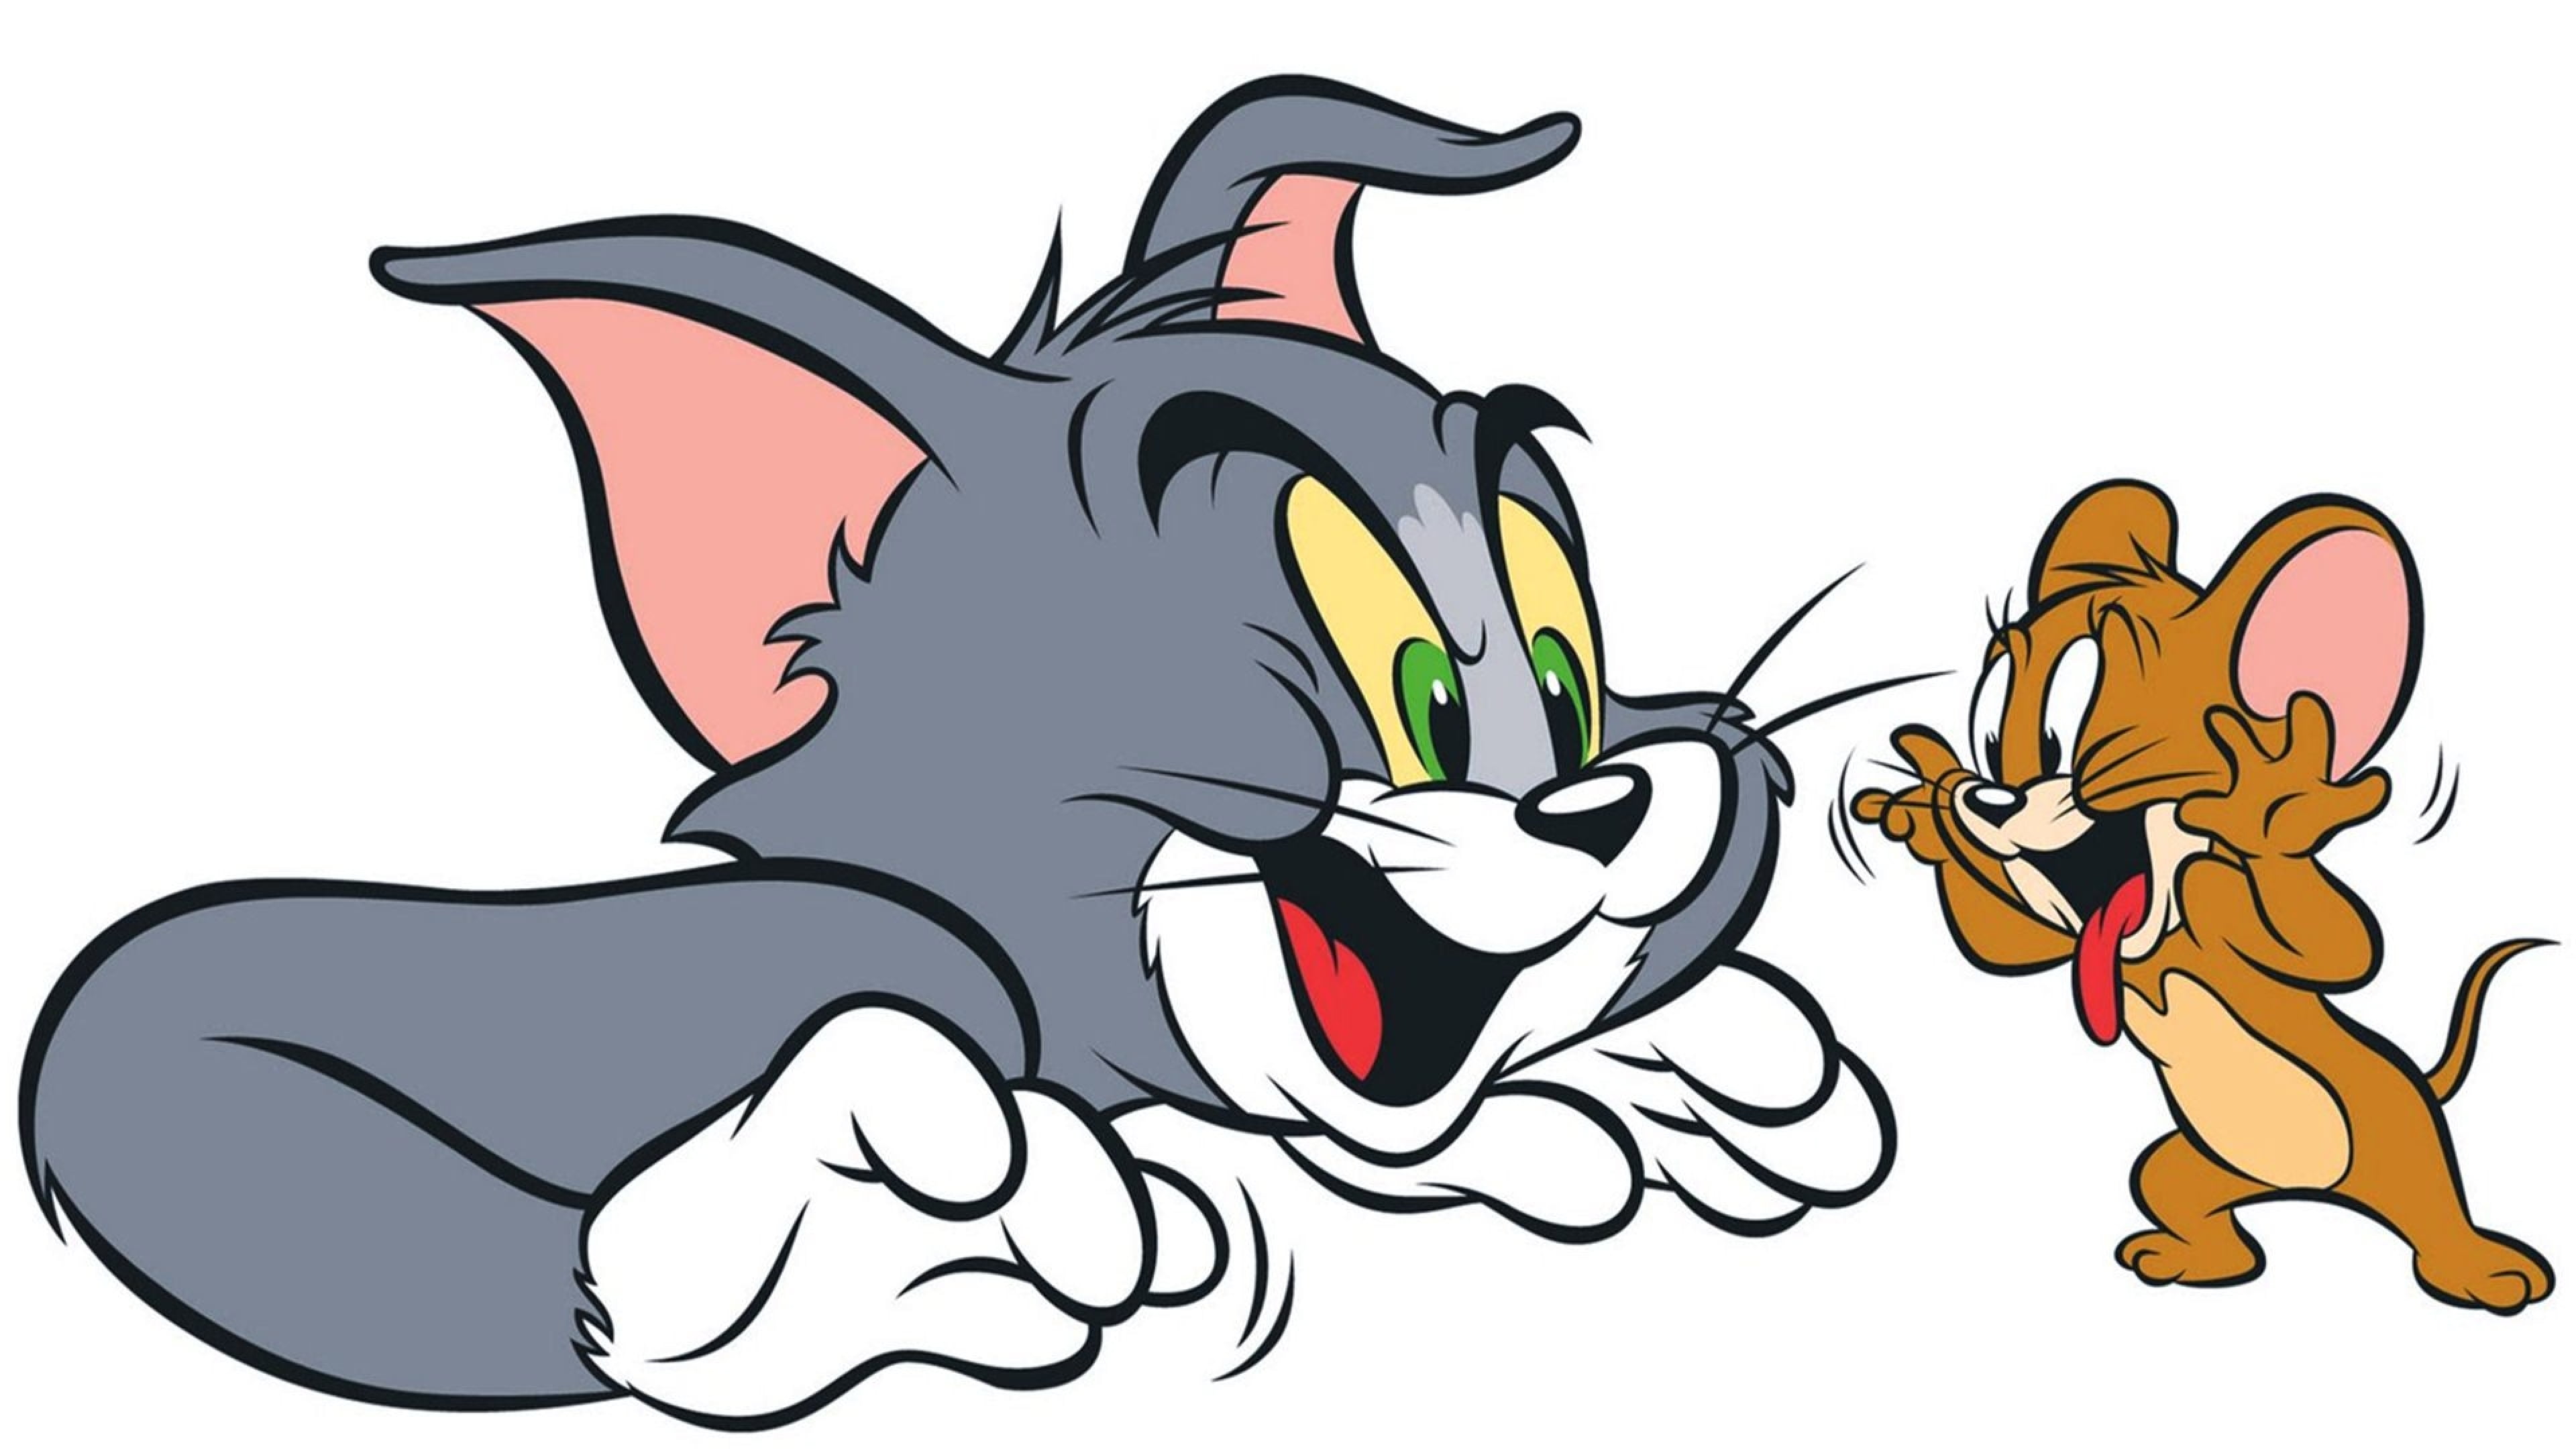 Tom And Jerry Cartoons Funny Characters Hd Wallpapers For Mobile Phones Tablet And Laptops 3840×2160